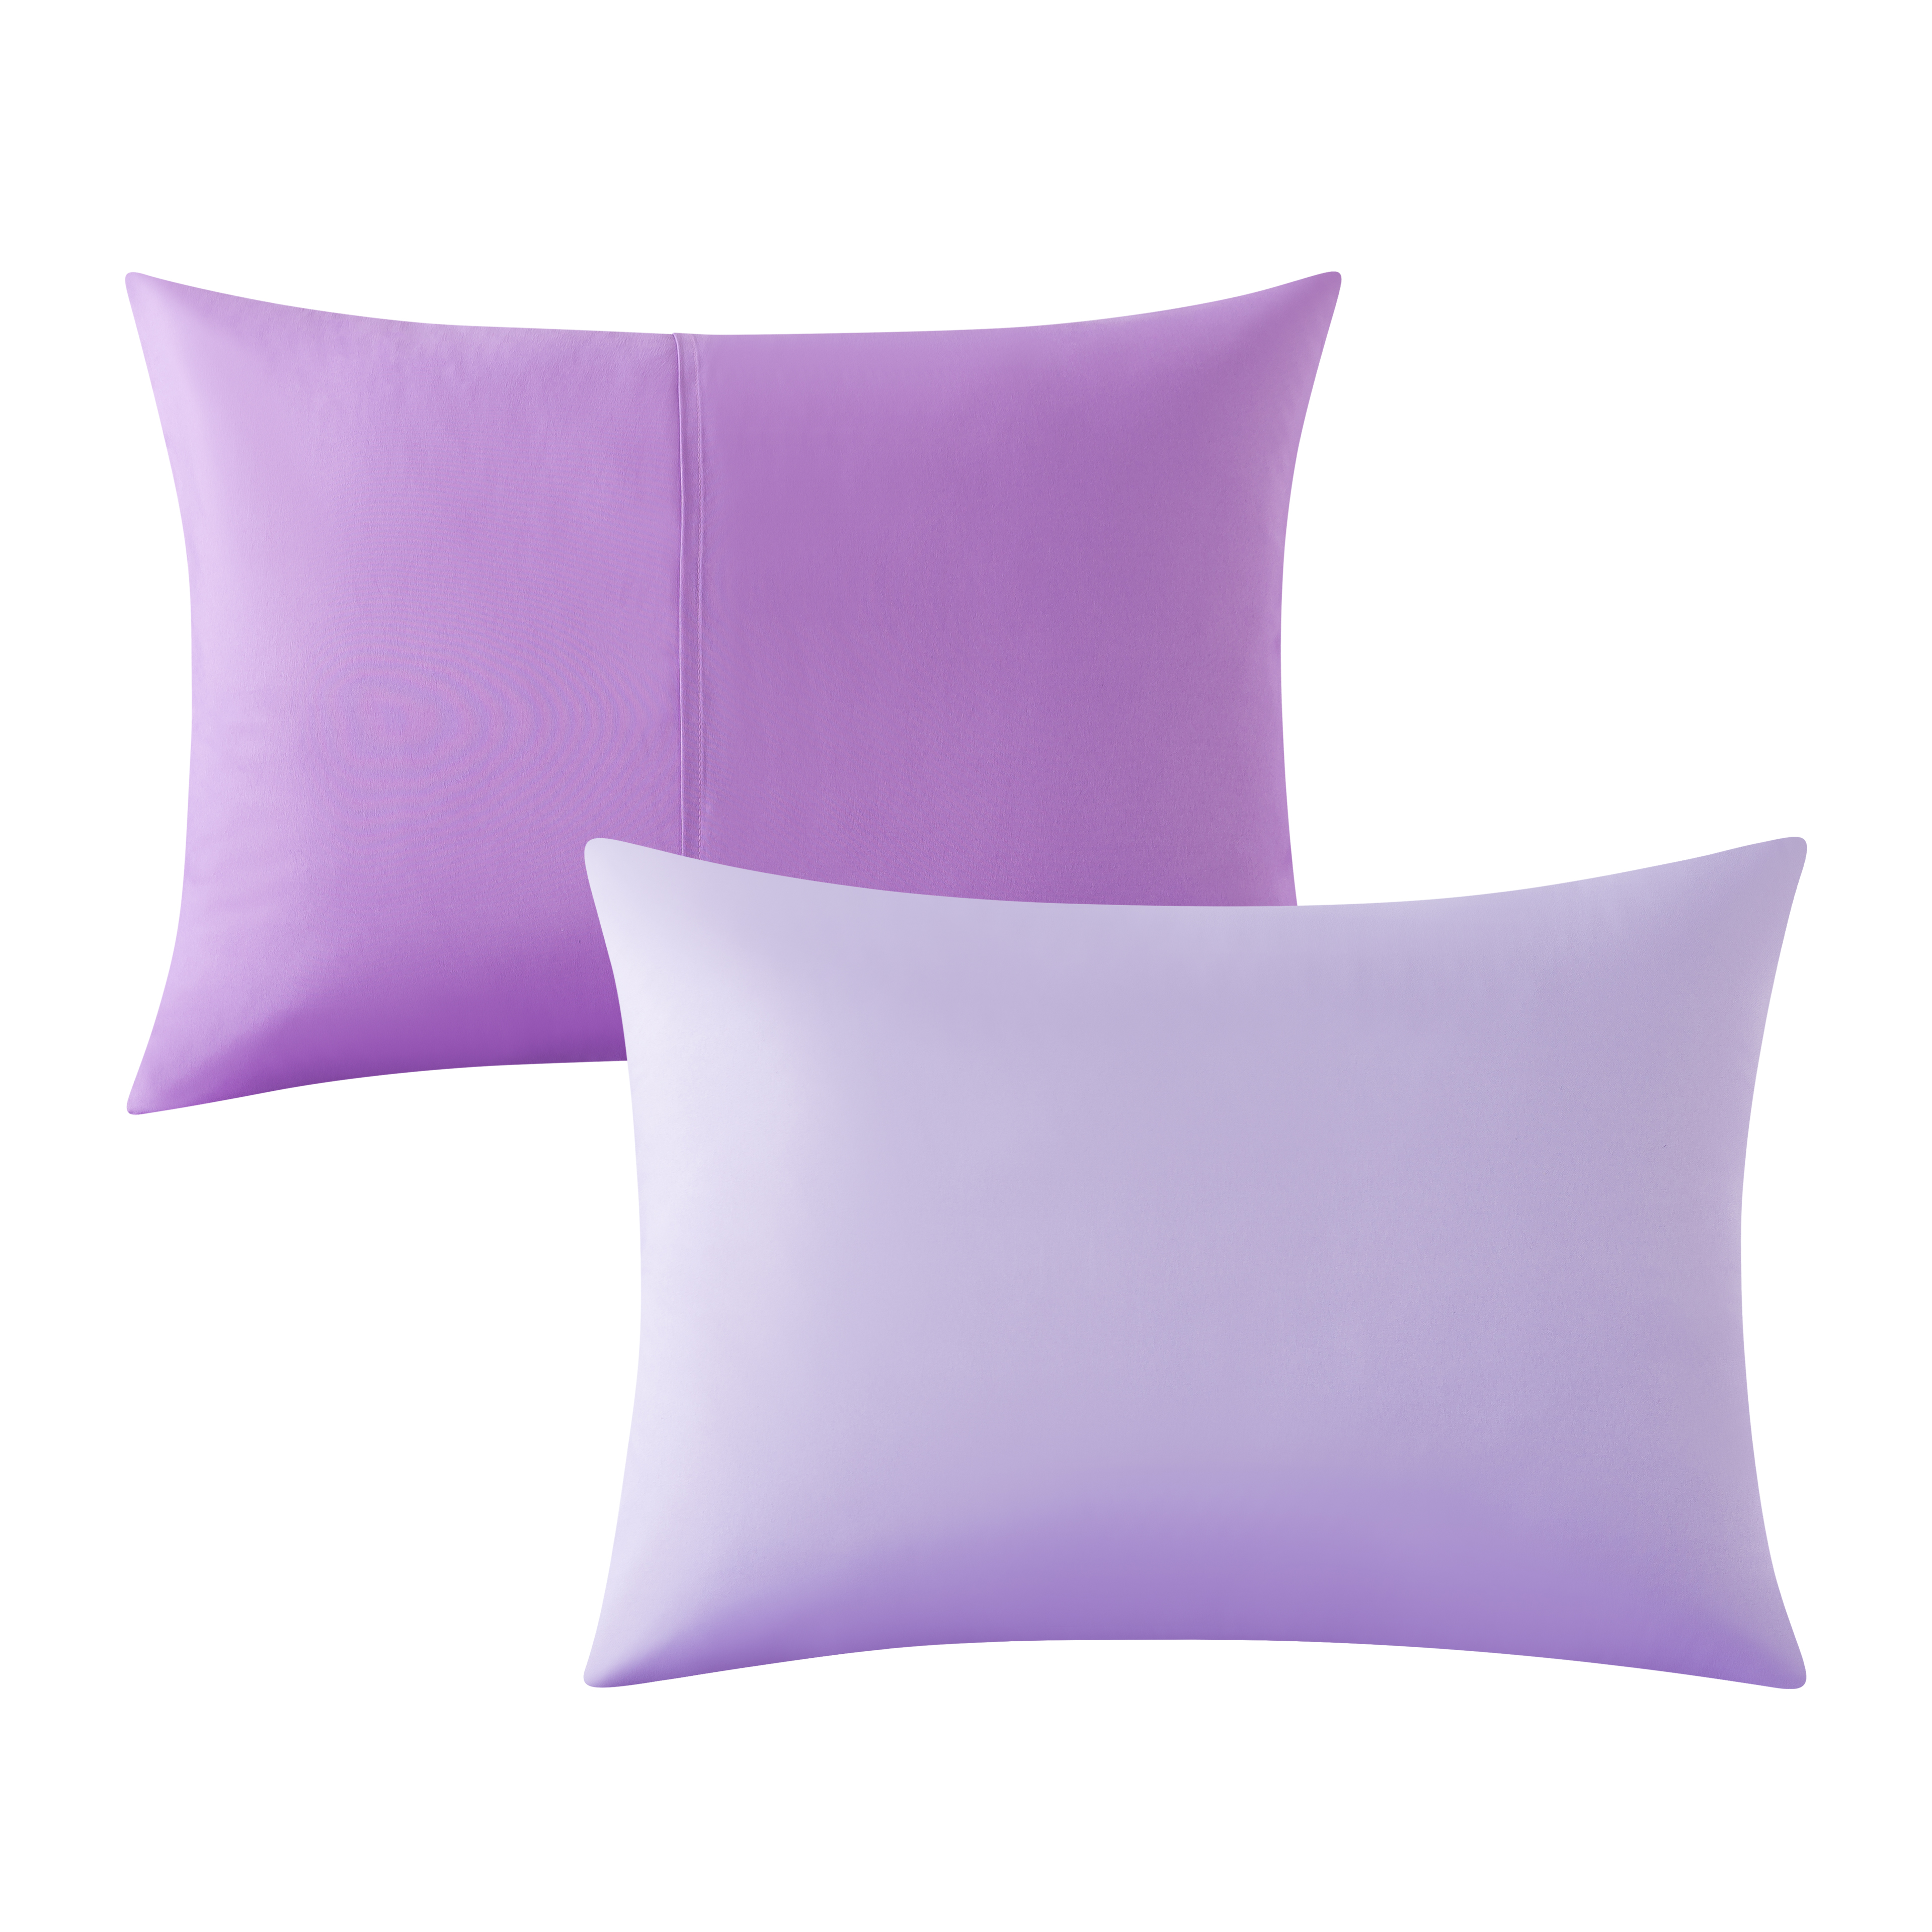 Mainstays Purple Reversible 7-Piece Bed in a Bag Comforter Set with Sheets, Queen - image 3 of 10